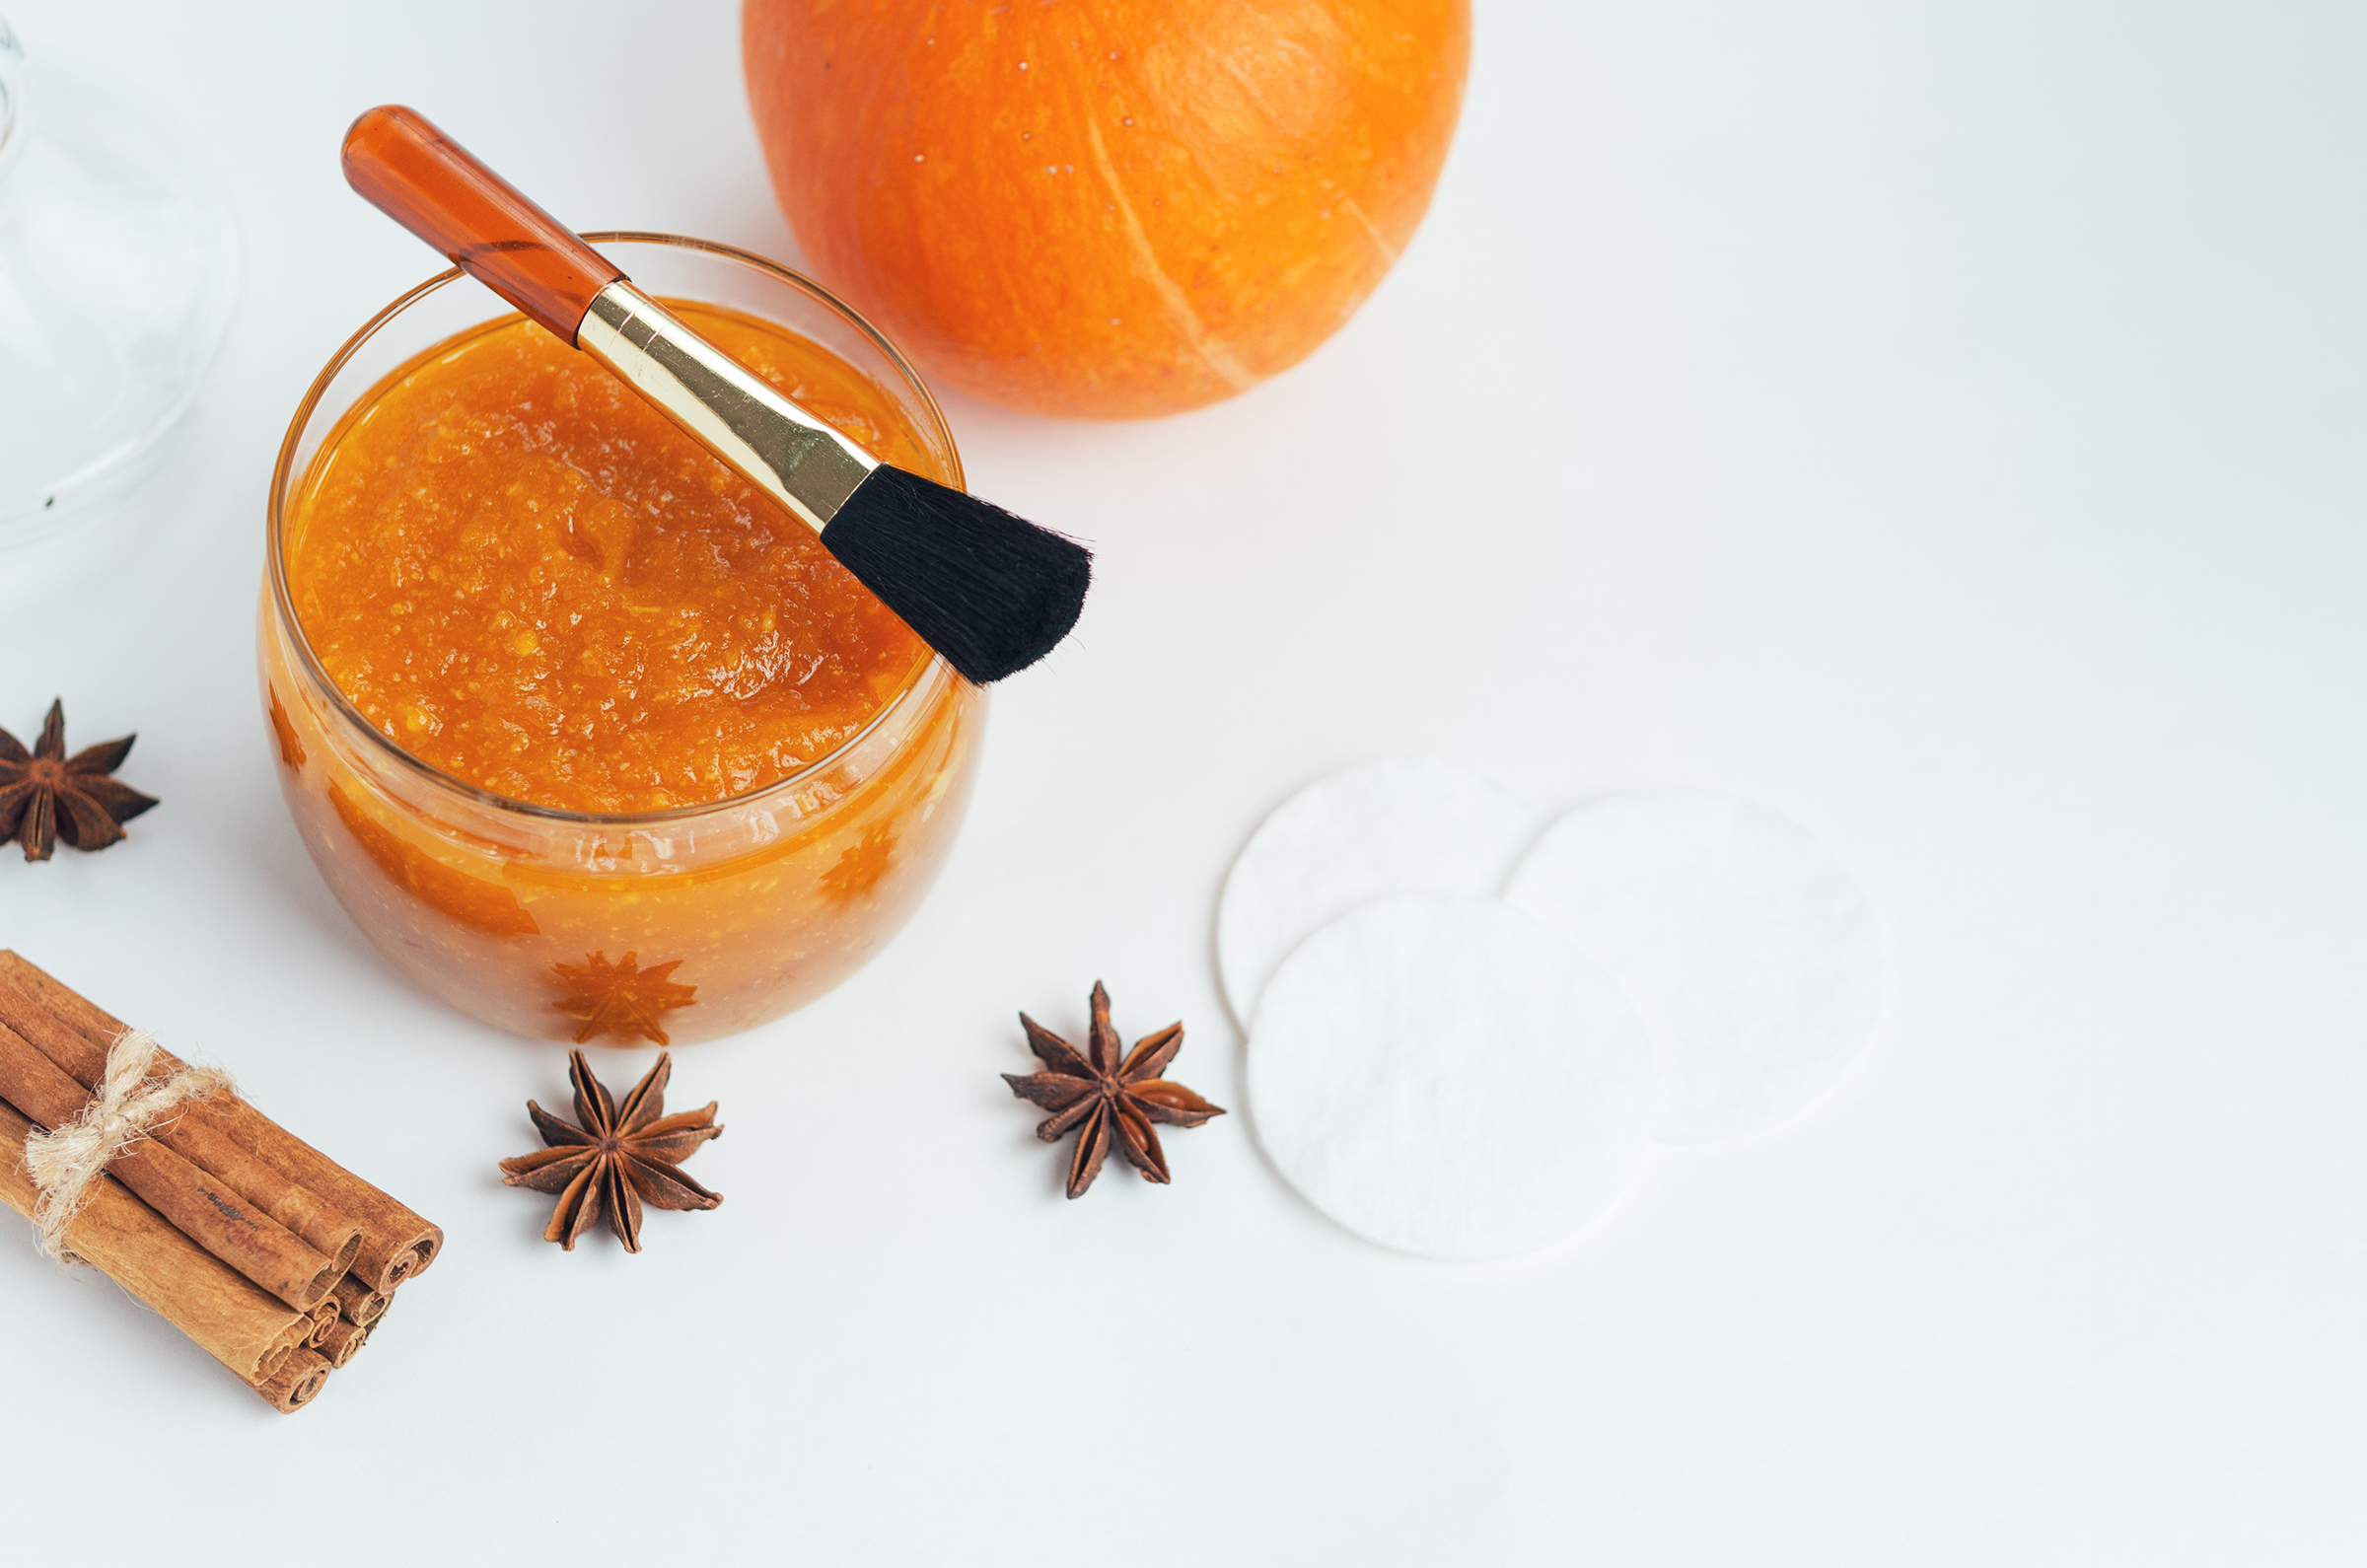 Homemade pumpkin jojoba face mask in a glass jar with a brush, surrounded by cinnamon sticks and star anise, for a fall renewal skincare theme.